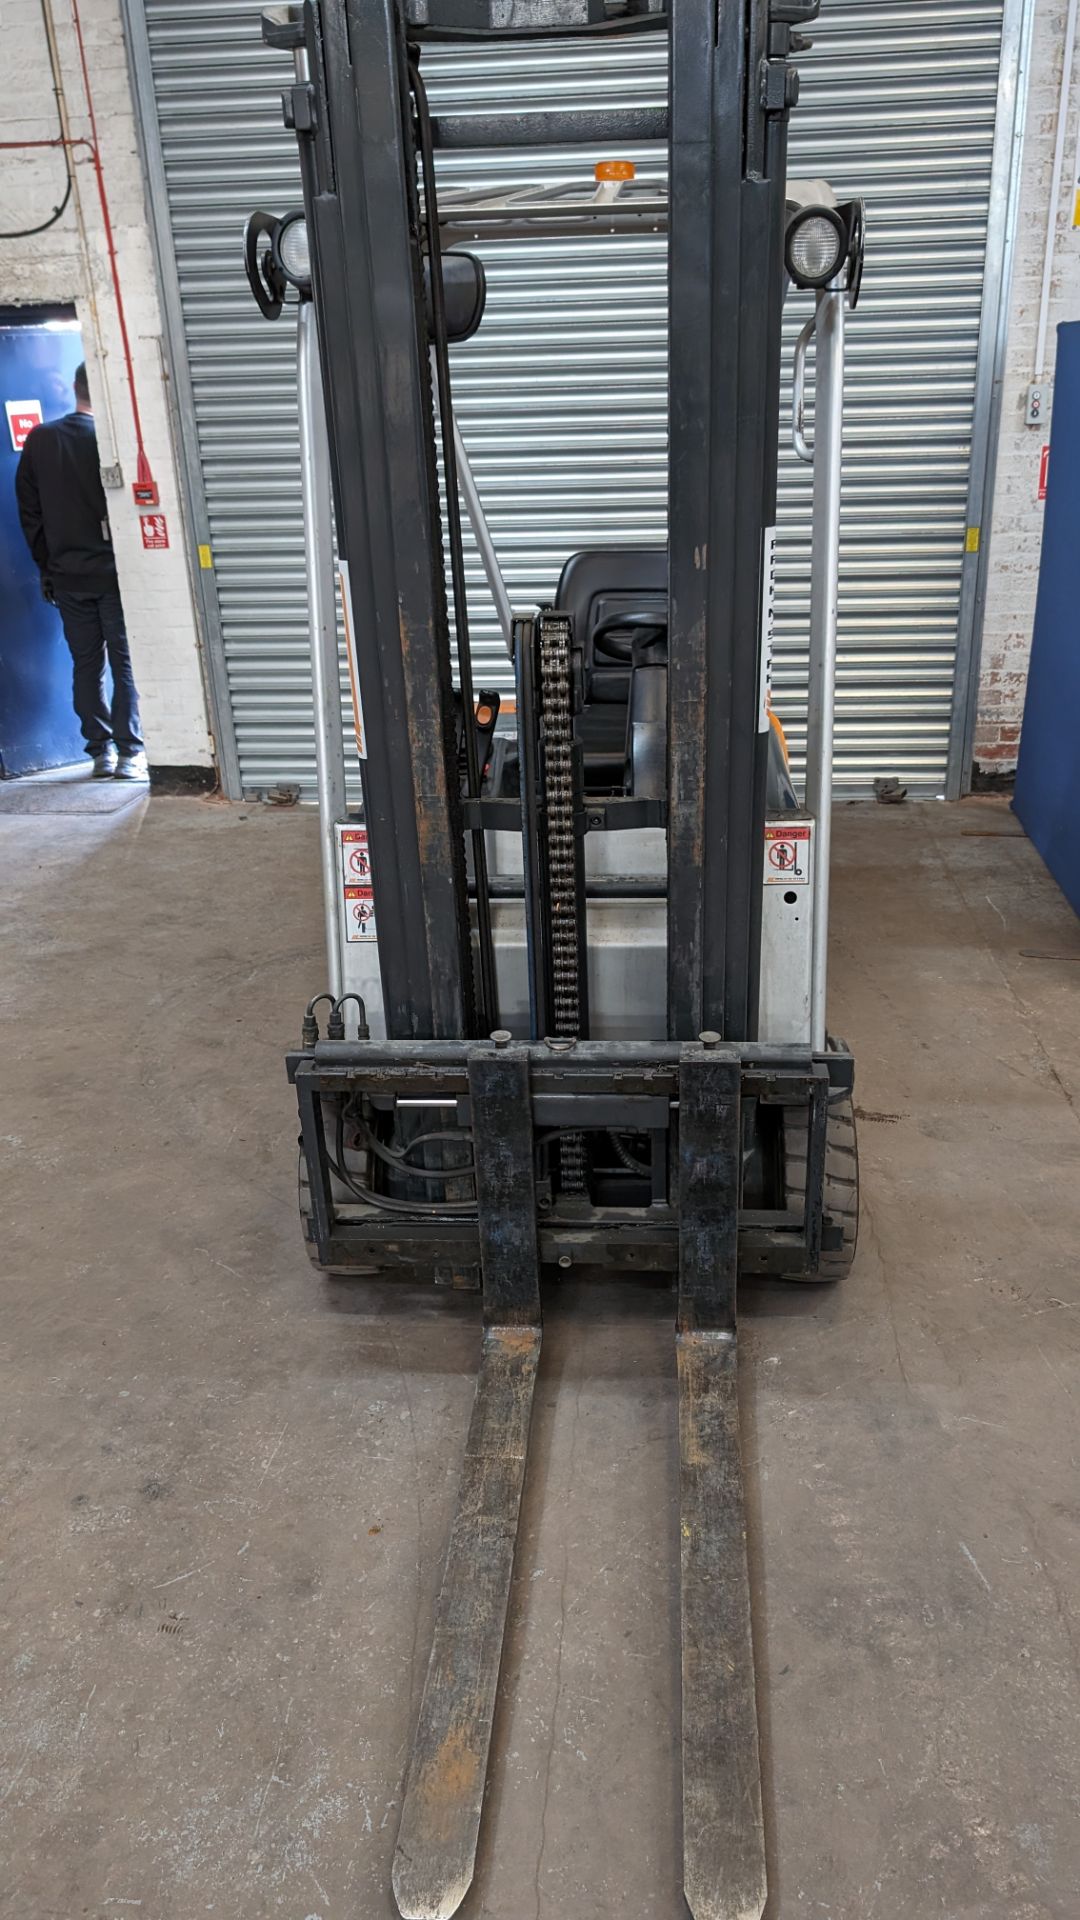 Still model RX-5015 3-wheel electric forklift truck with sideshift, 1.5 tonne capacity, including St - Image 5 of 18